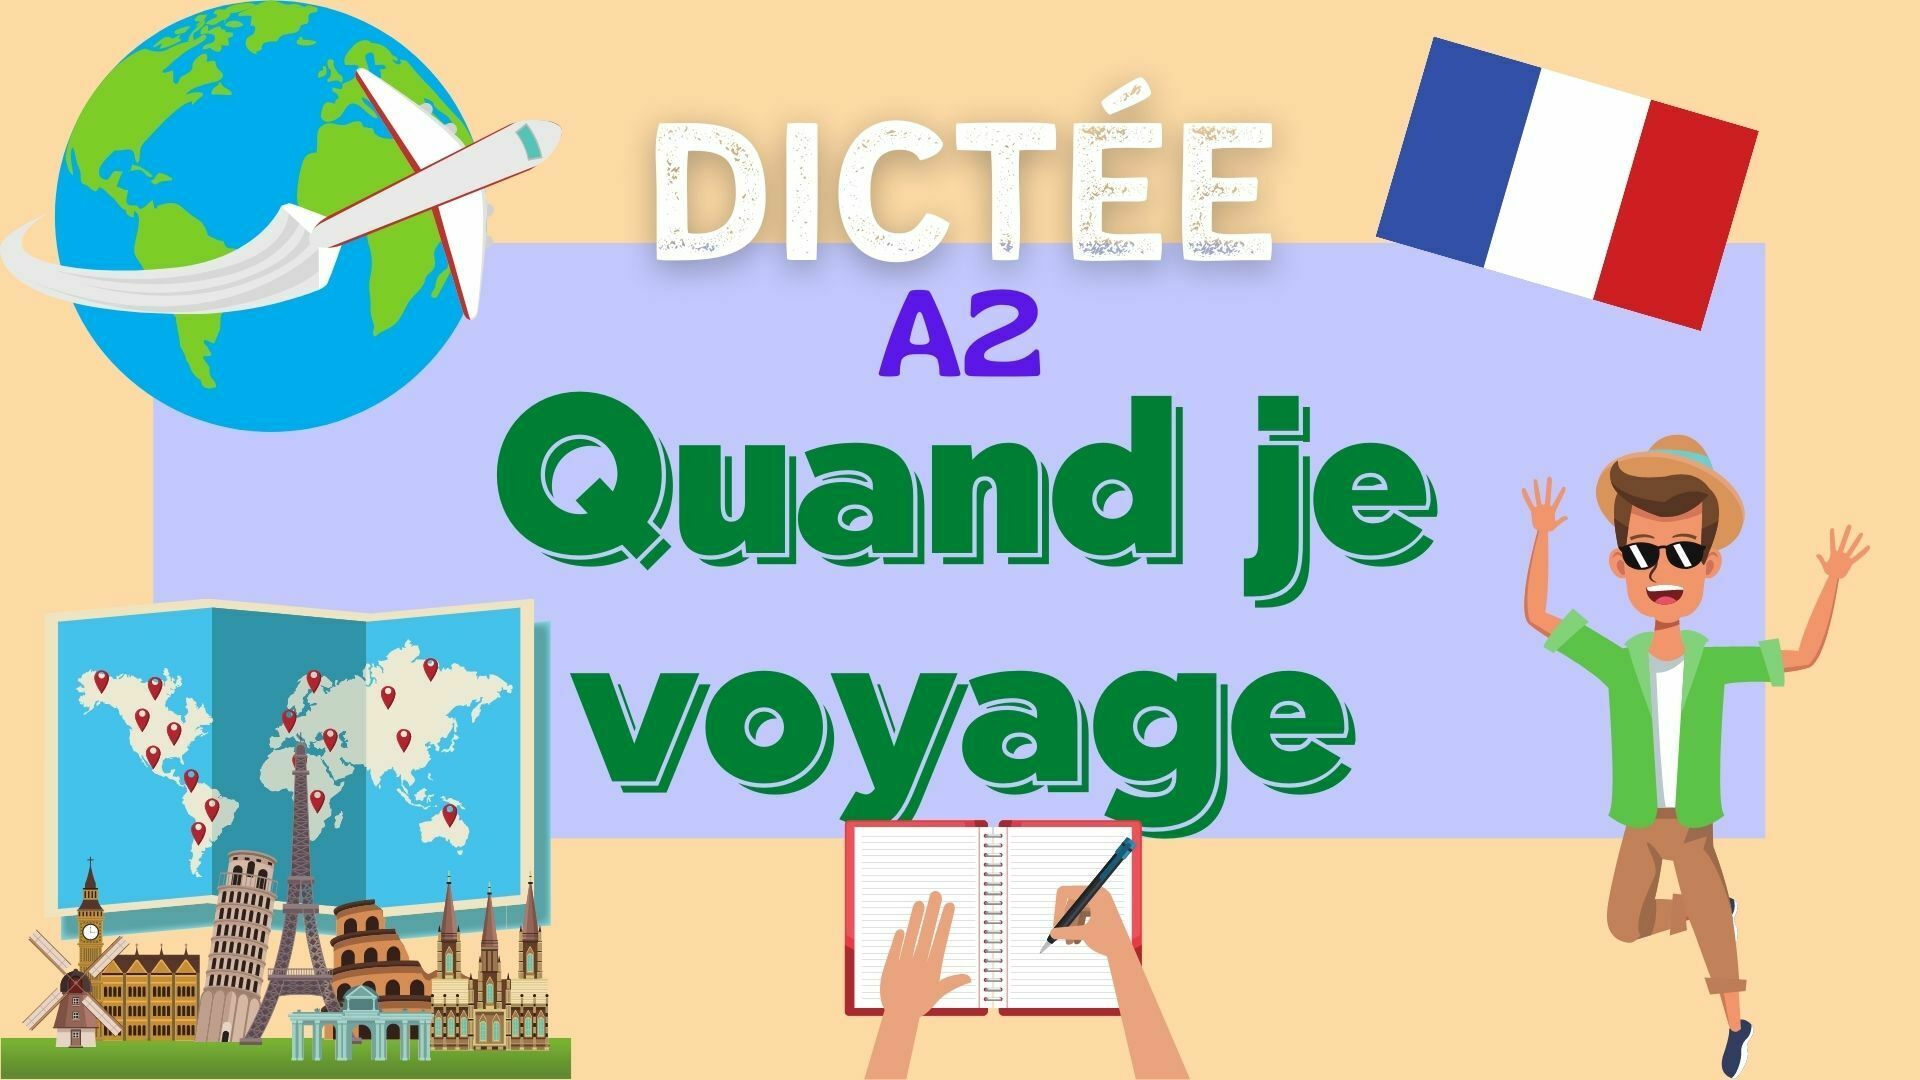 Quand je voyage - French dictation